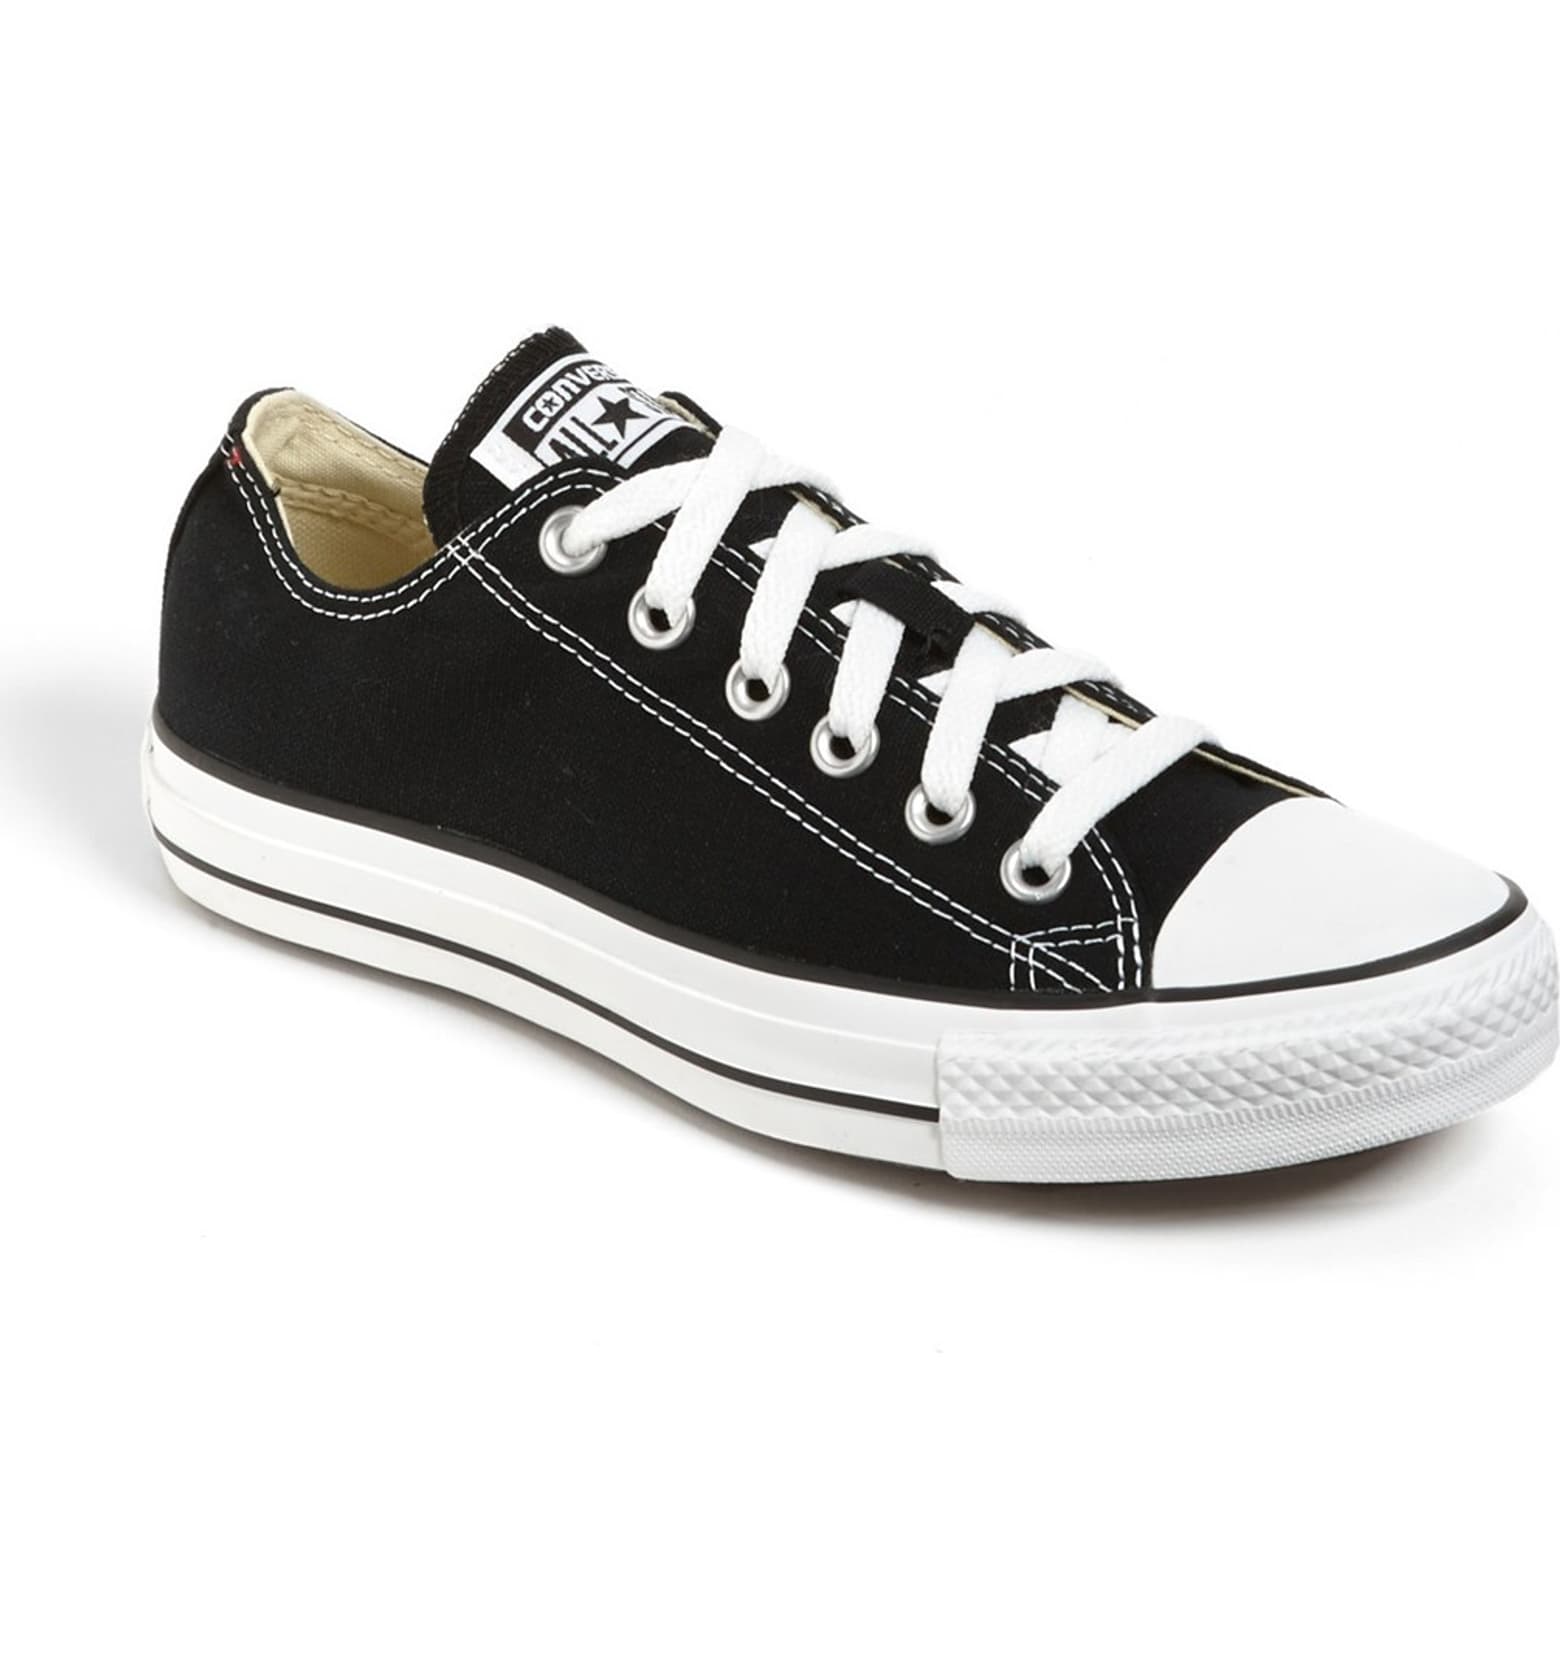 outfits with black and white converse